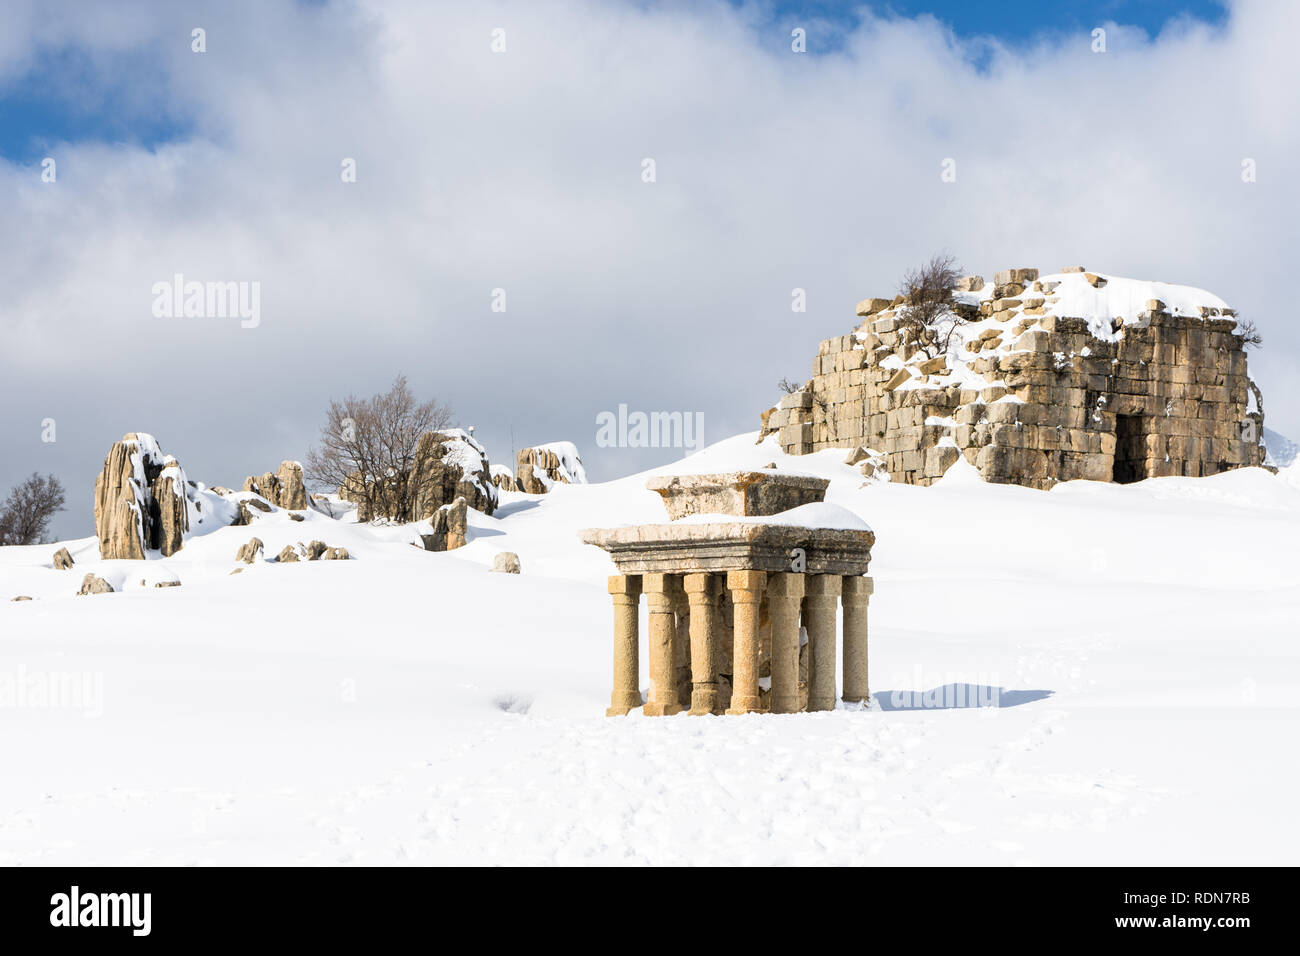 Tower of Caudius and the small altar covered in snow during winter, Faqra Roman ruins, Lebanon Stock Photo